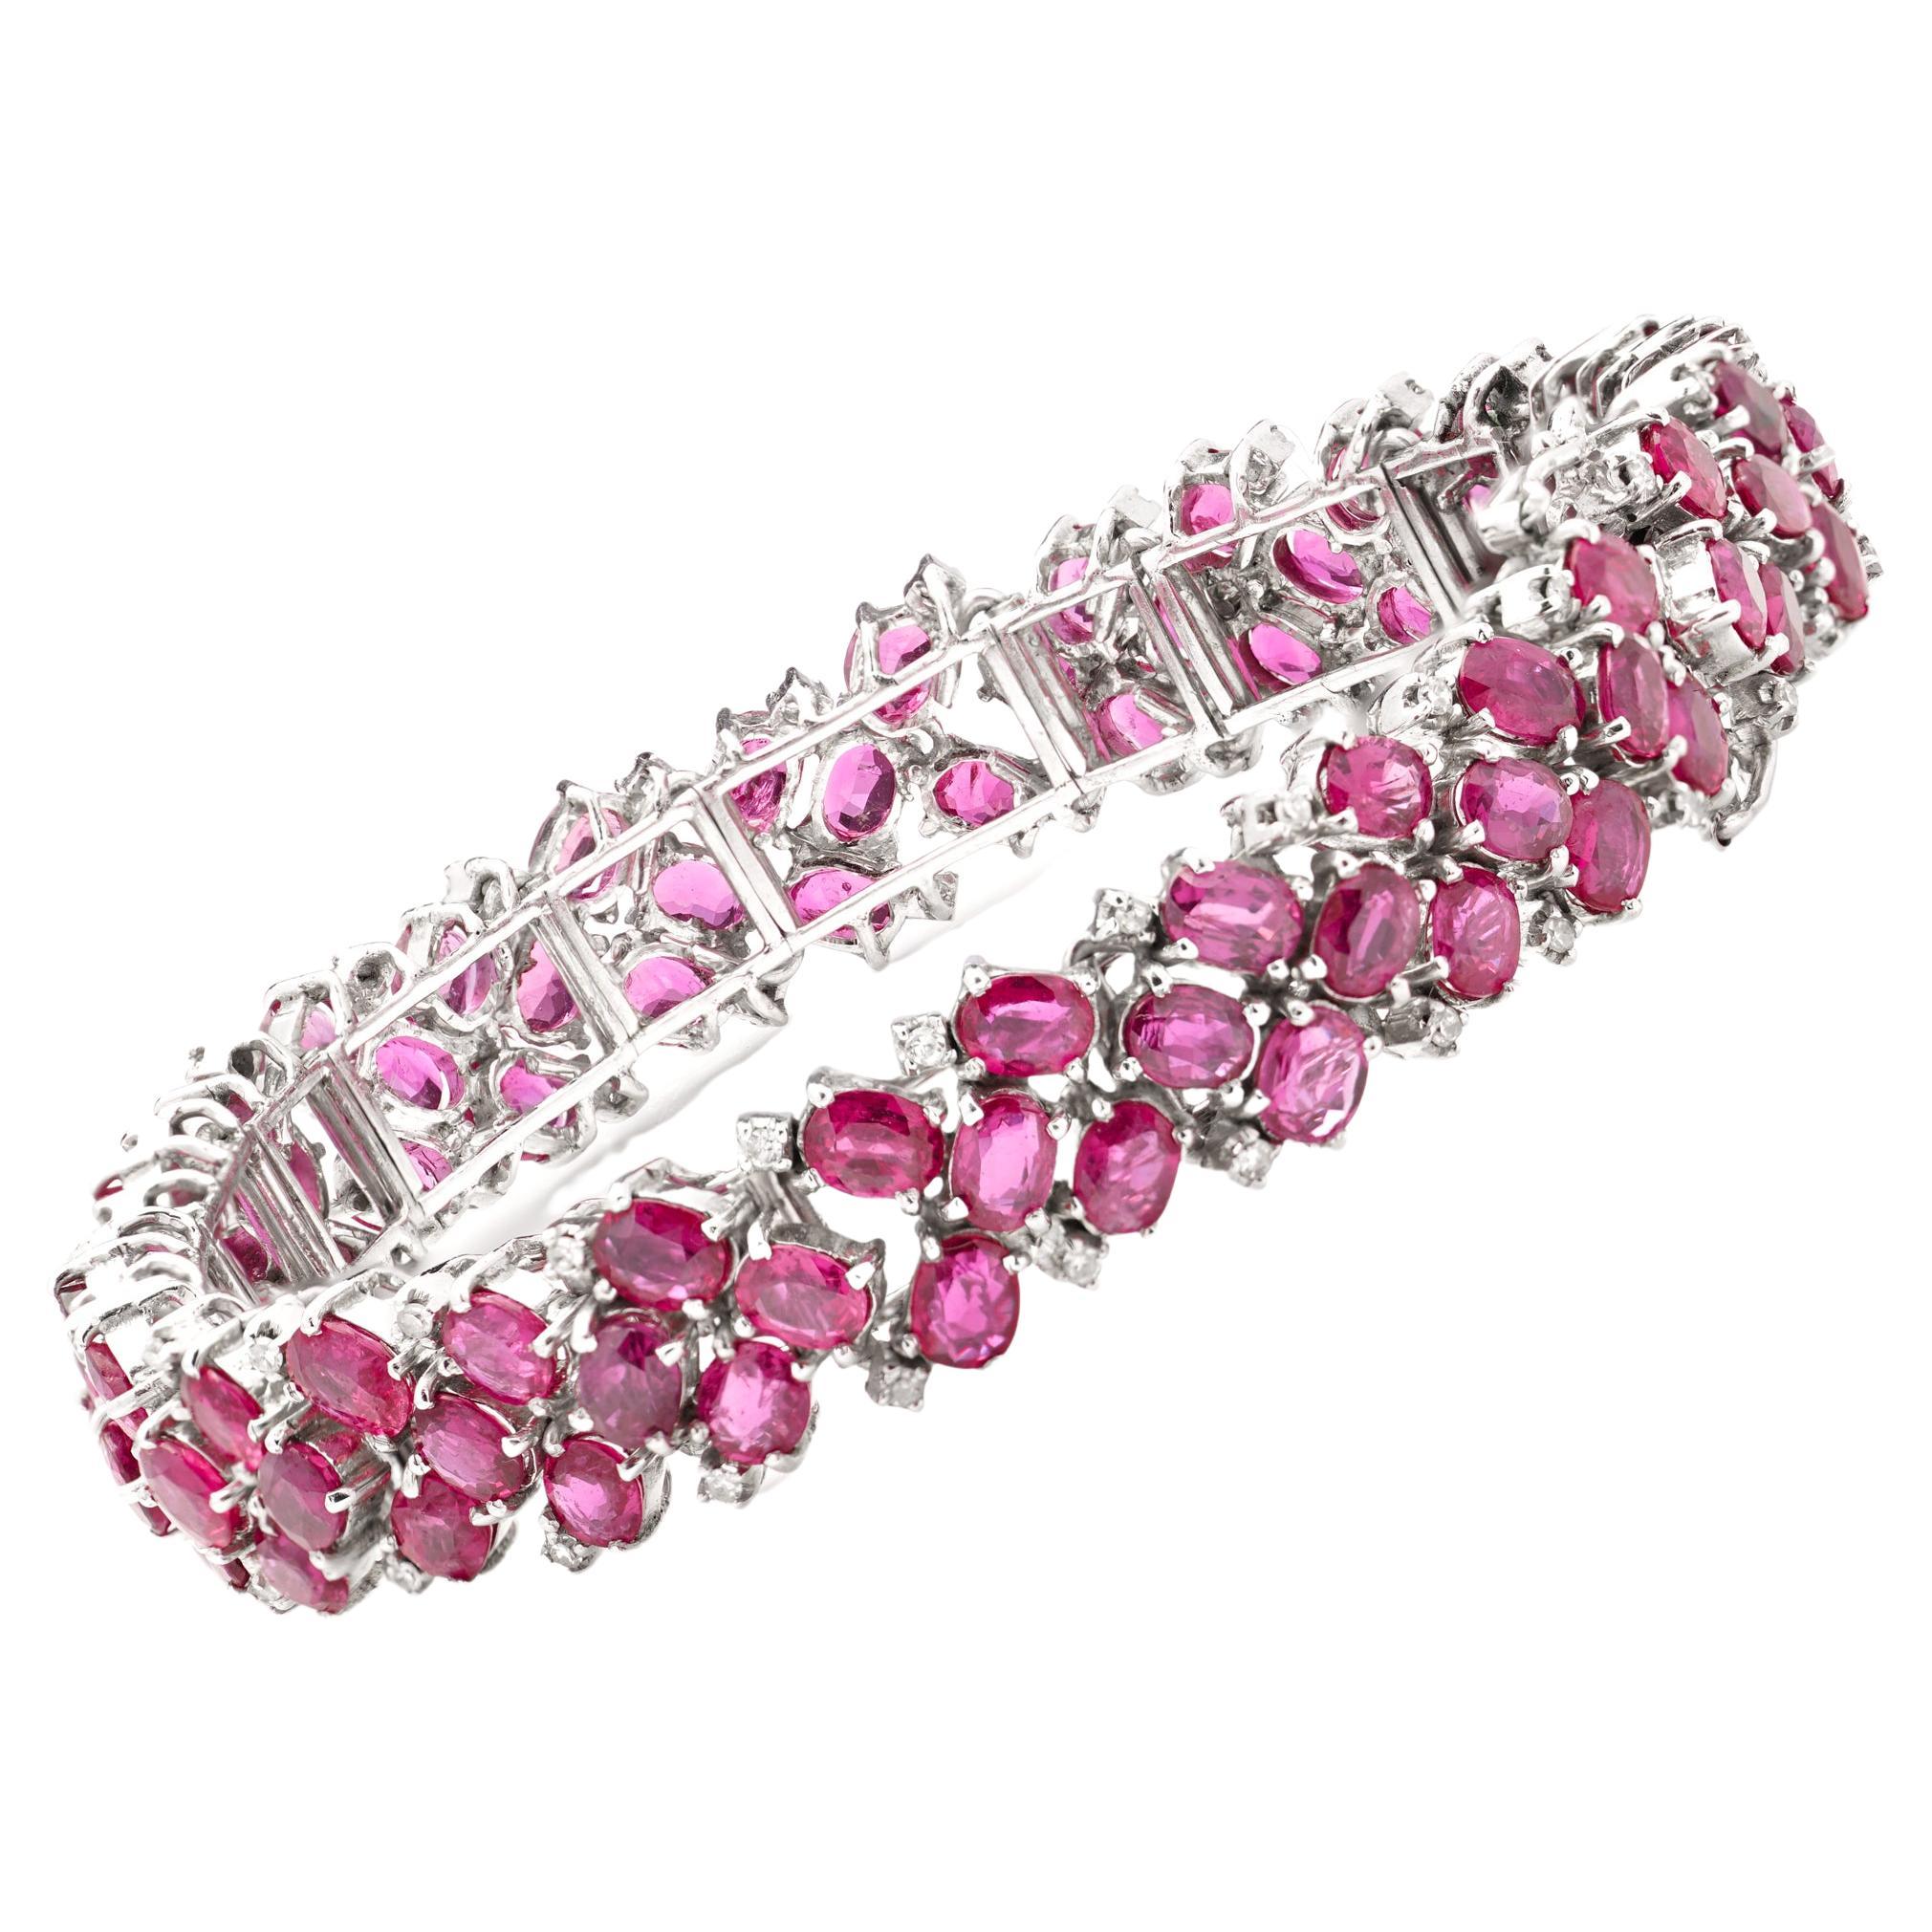 14kt. white gold link bracelet set with 22.5 carats of oval faceted rubies 